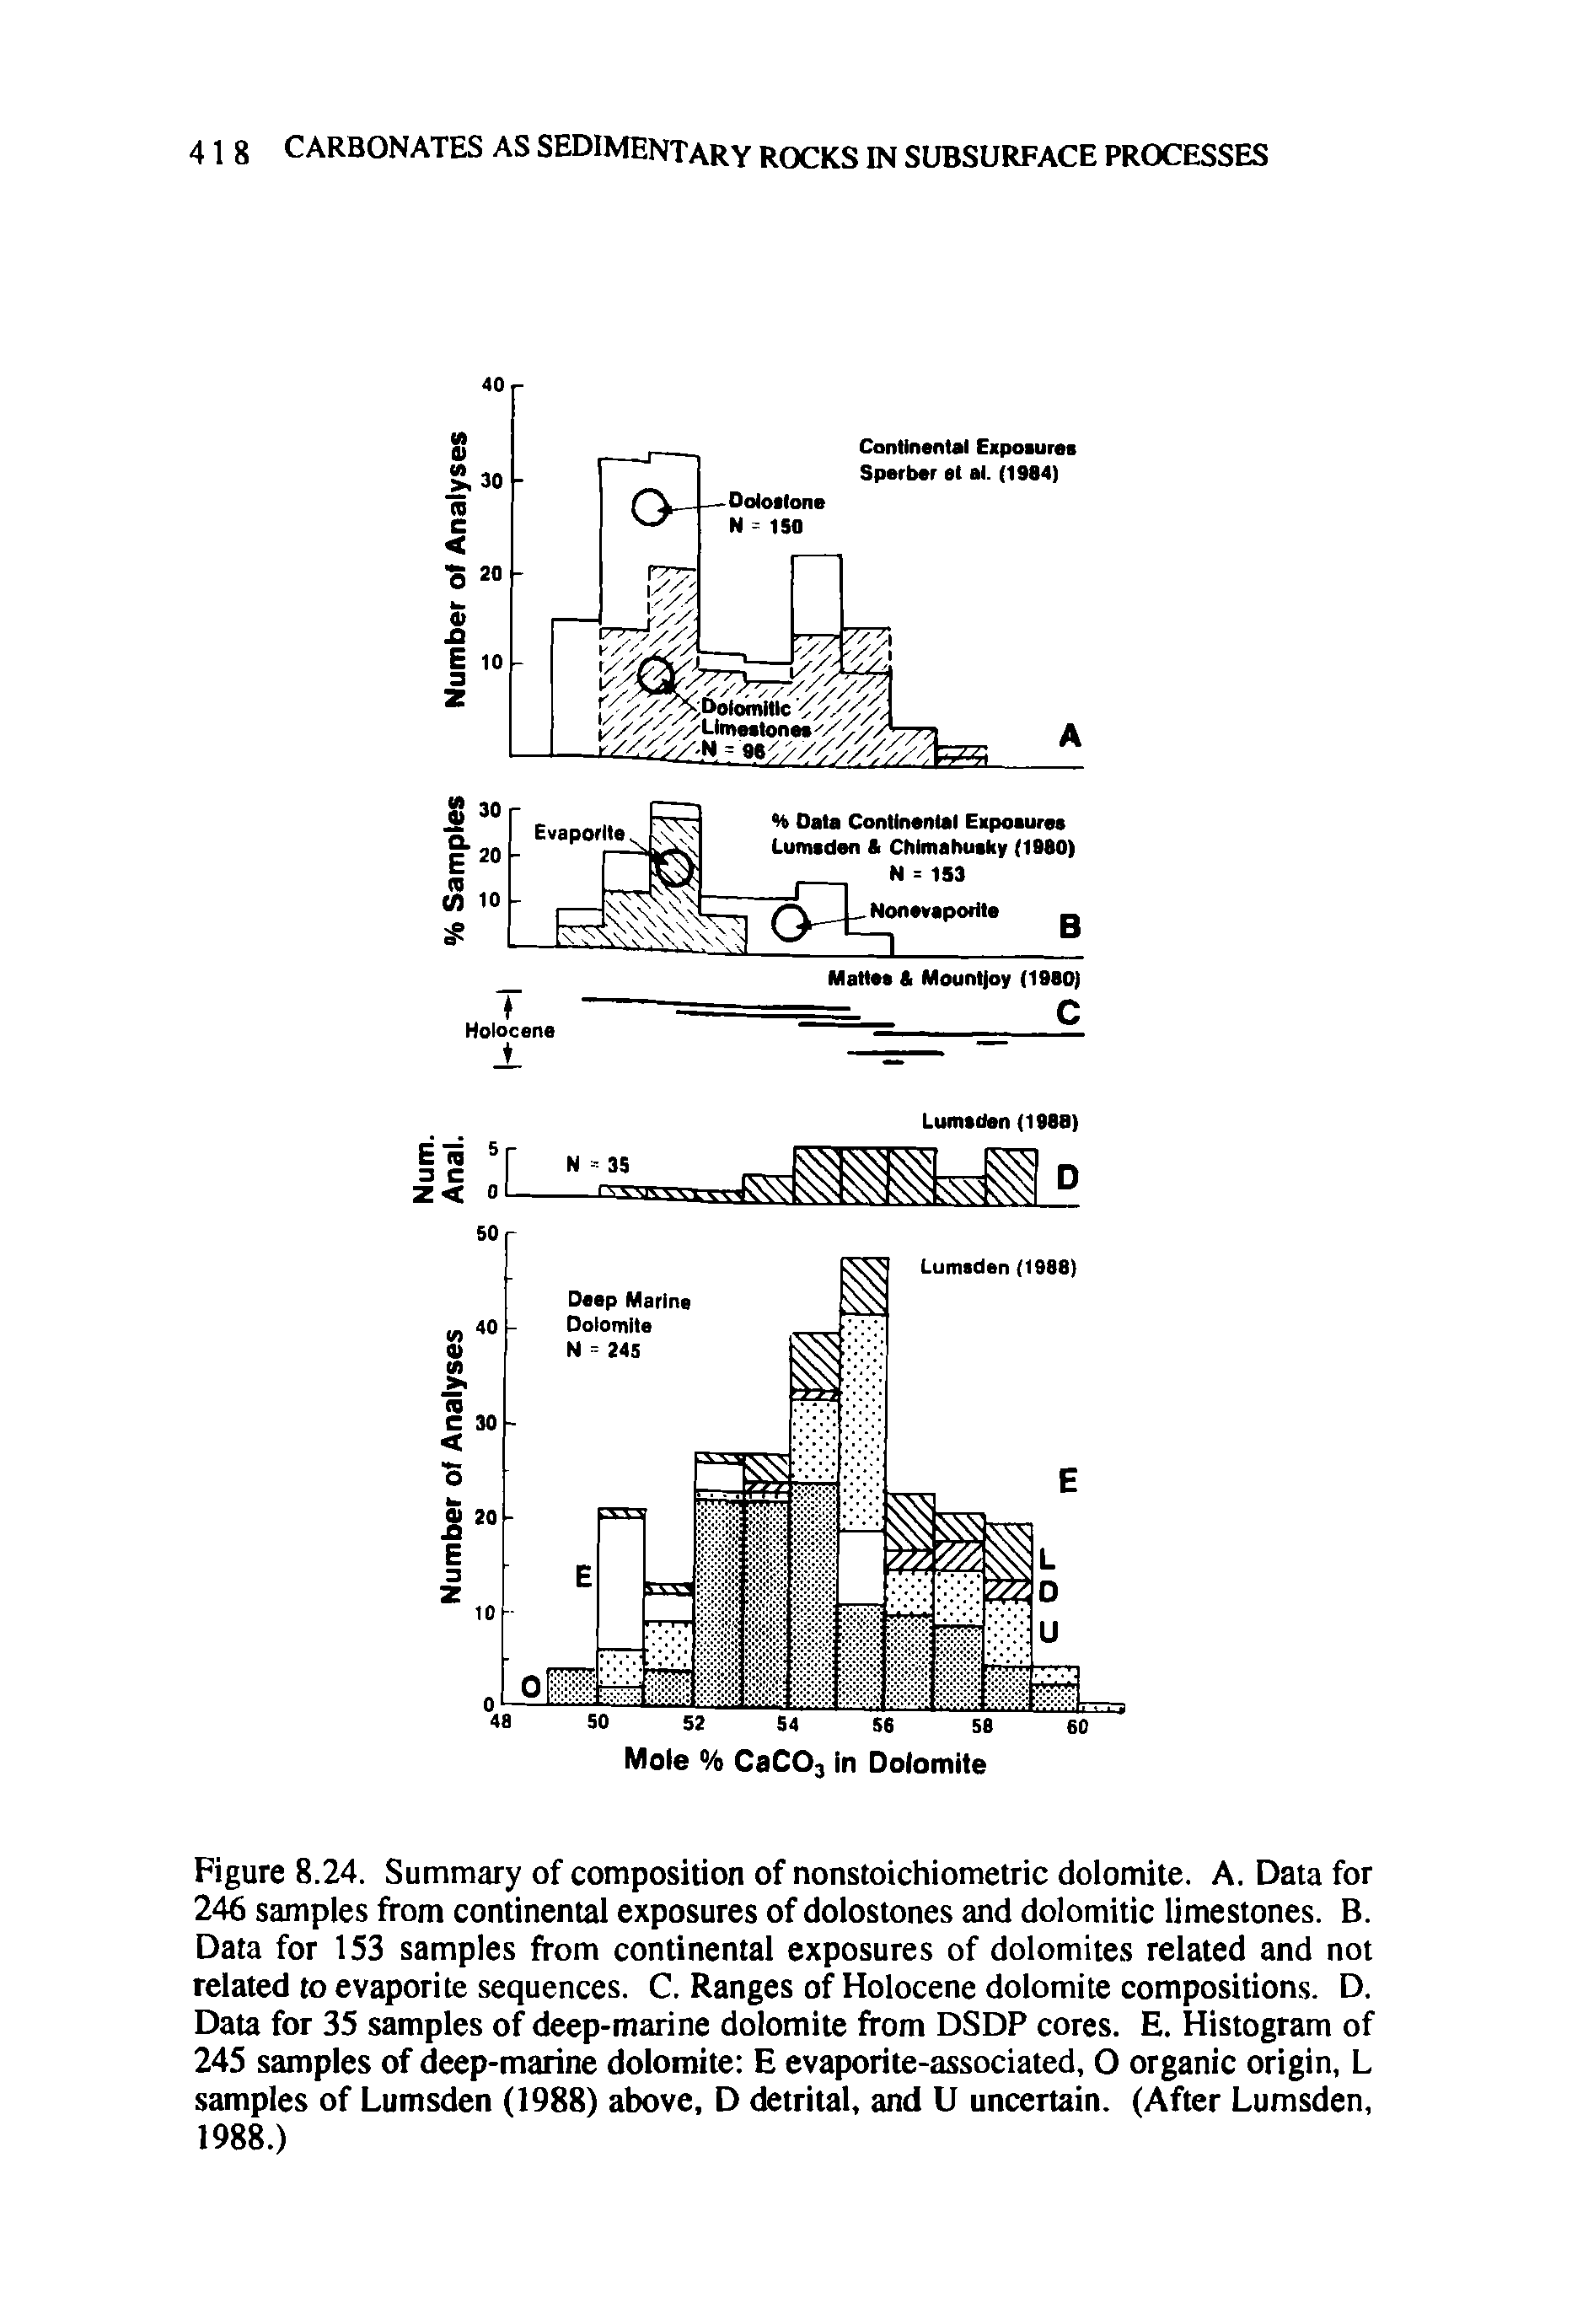 Figure 8.24. Summary of composition of nonstoichiometric dolomite. A. Data for 246 samples from continental exposures of dolostones and dolomitic limestones. B. Data for 153 samples from continental exposures of dolomites related and not related to evaporite sequences. C. Ranges of Holocene dolomite compositions. D. Data for 35 samples of deep-marine dolomite from DSDP cores. E. Histogram of 245 samples of deep-marine dolomite E evaporite-associated, O organic origin, L samples of Lumsden (1988) above, D detrital, and U uncertain. (After Lumsden, 1988.)...